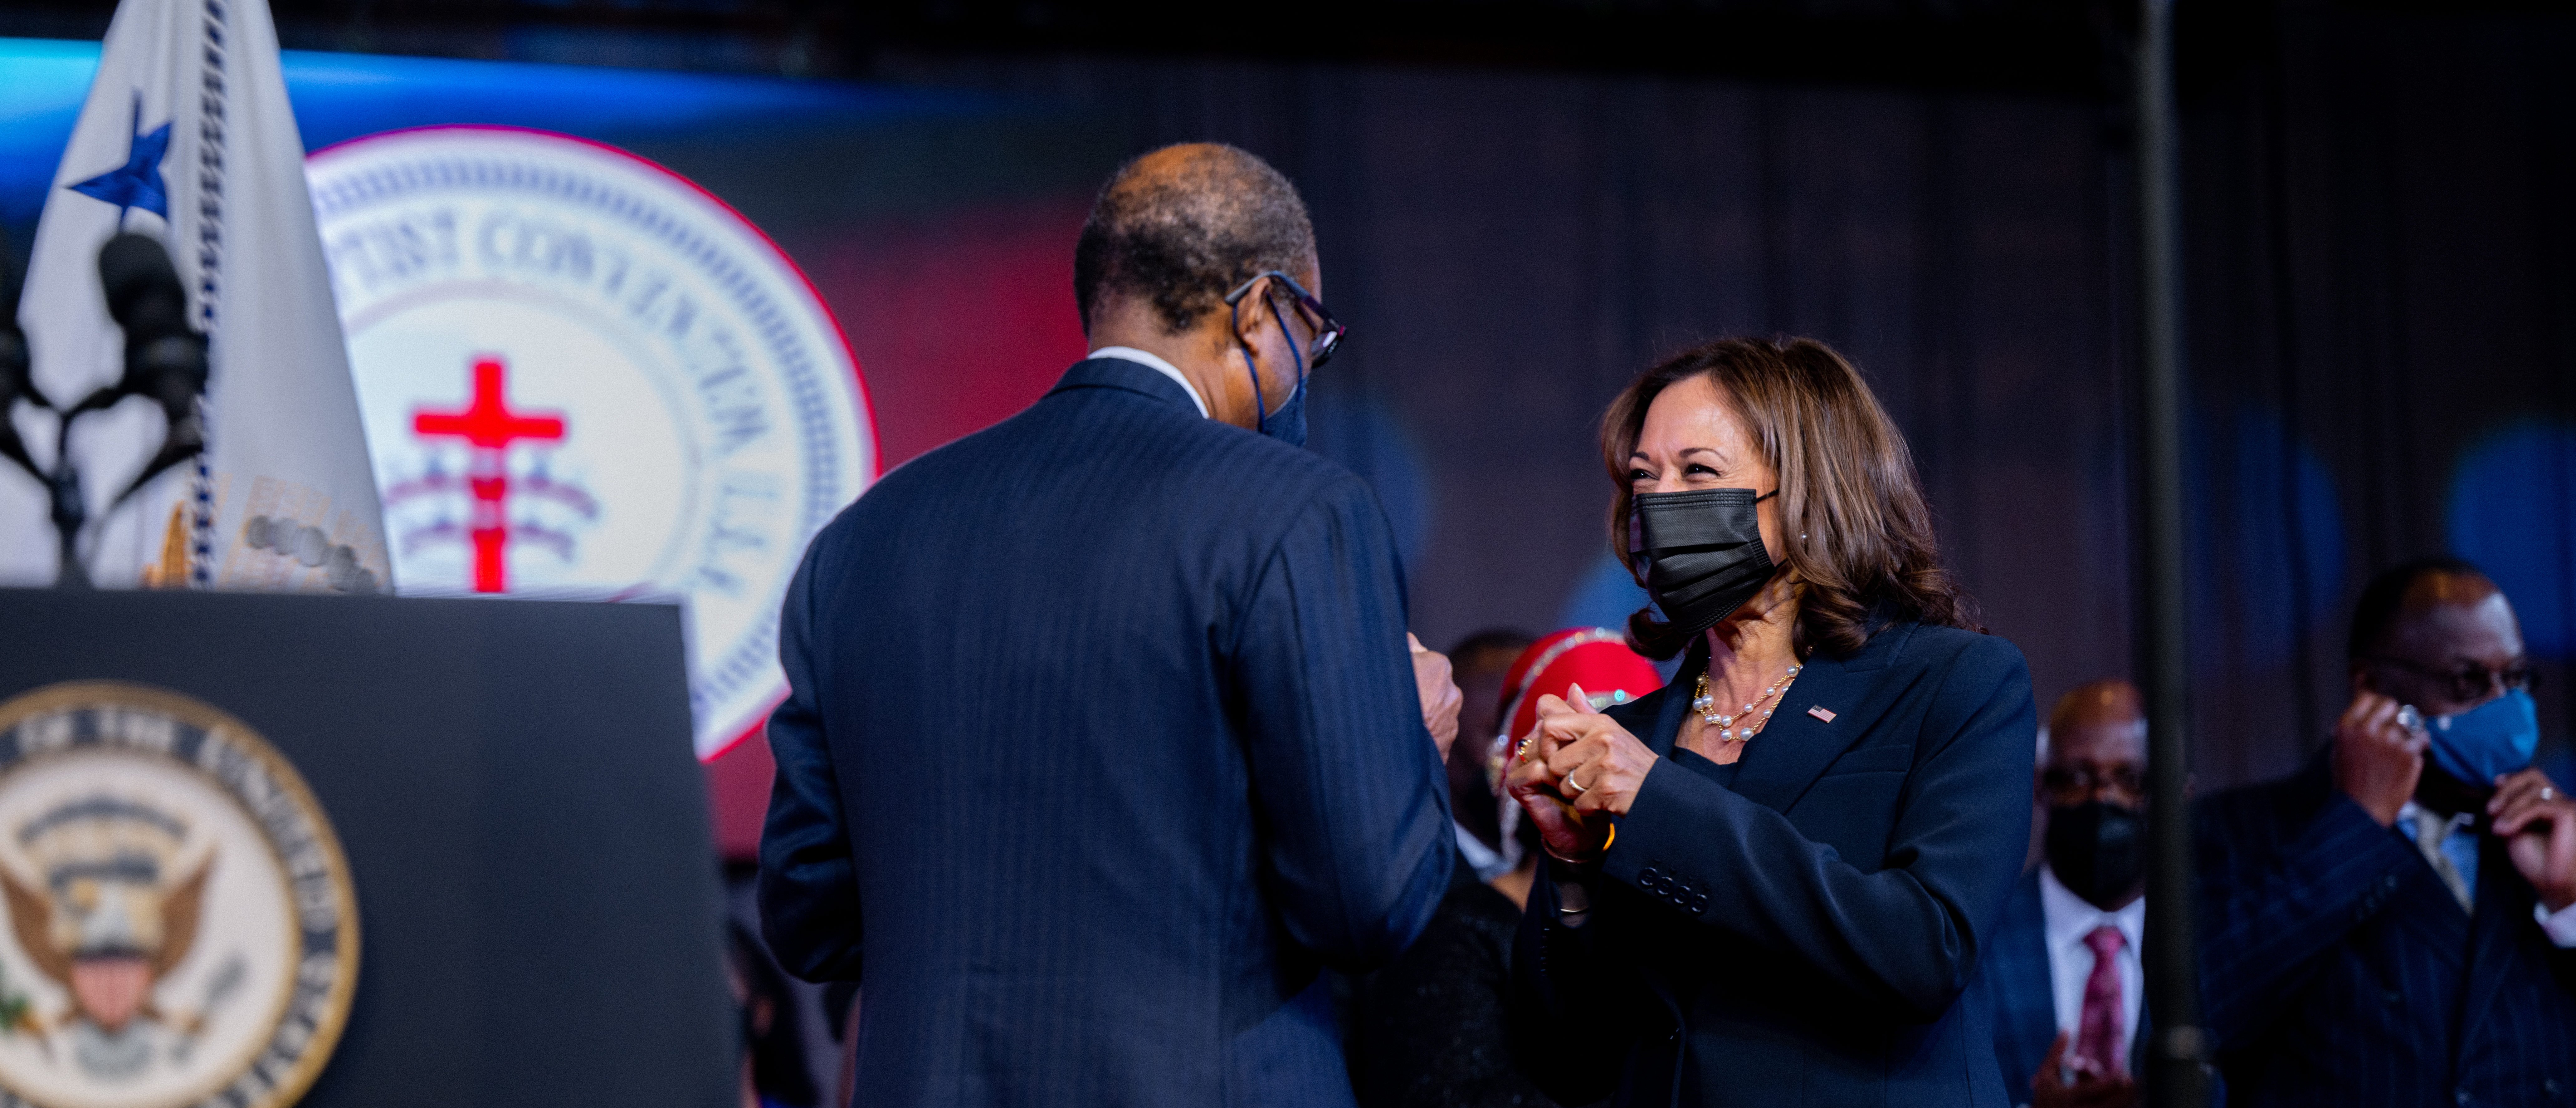 US Vice President Kamala Harris greets the National Baptist Convention President Dr. Jerry Young during the National Baptist Convention on September 08, 2022 in Houston, Texas. The National Baptist Convention was formed in 1886, and gathers church members and leaders from around the country in discussing church evangelism, disaster relief, and funding for education. (Photo by Brandon Bell/Getty Images)